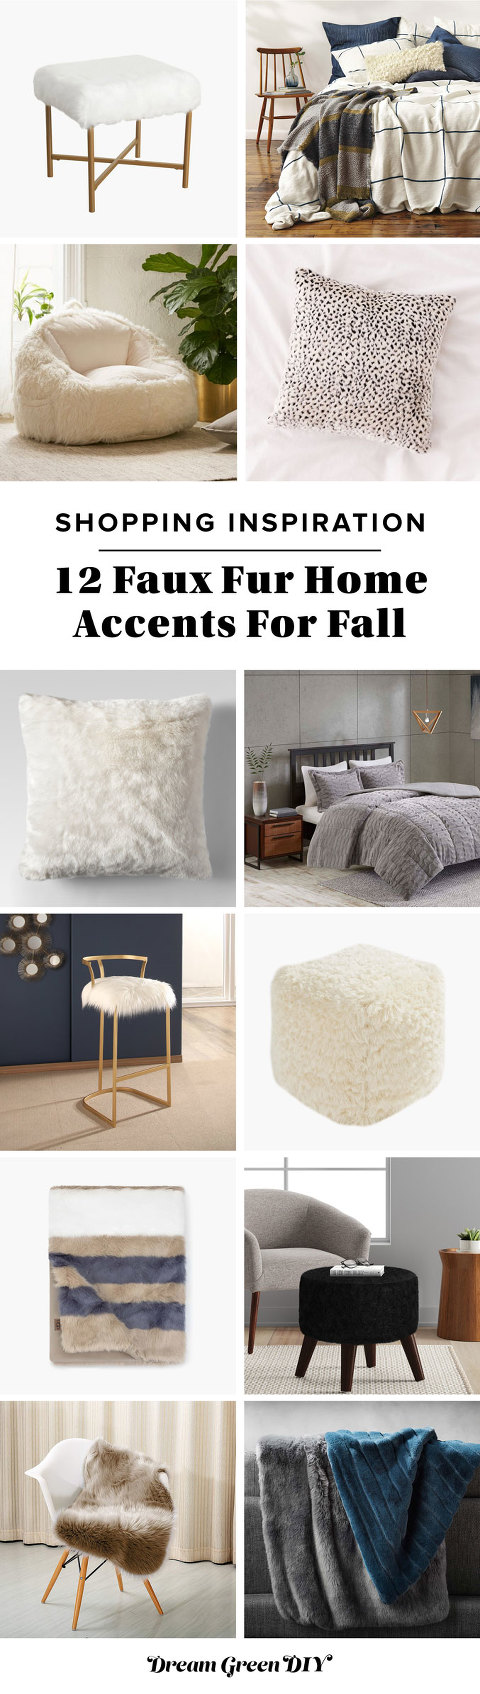 12 Faux Fur Home Accents For Fall